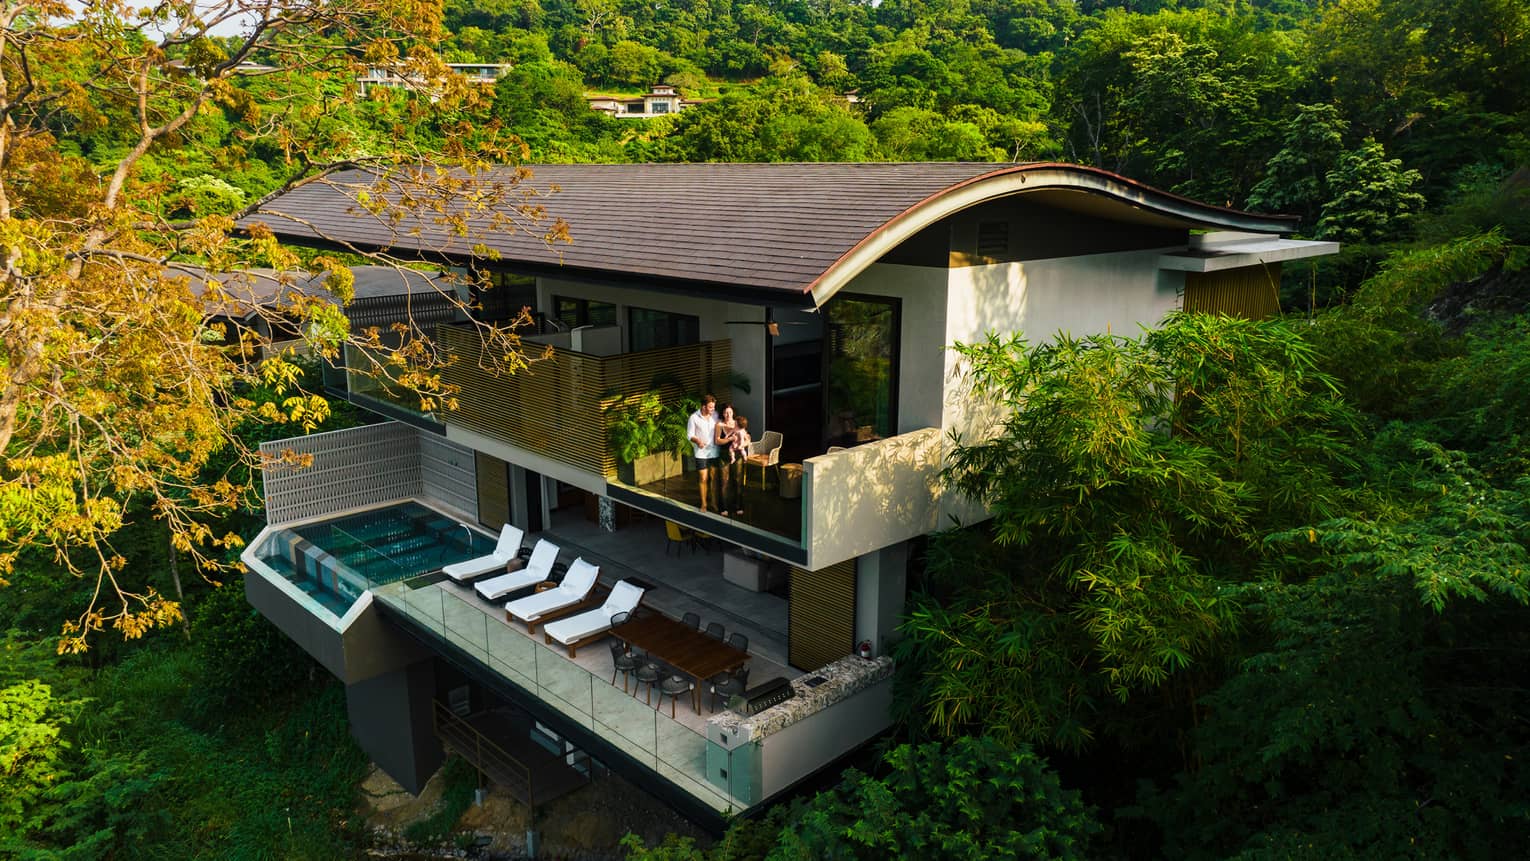 Two-level villa tucked into the jungle featuring a curved roof, multiple terraces and an outdoor pool and deck